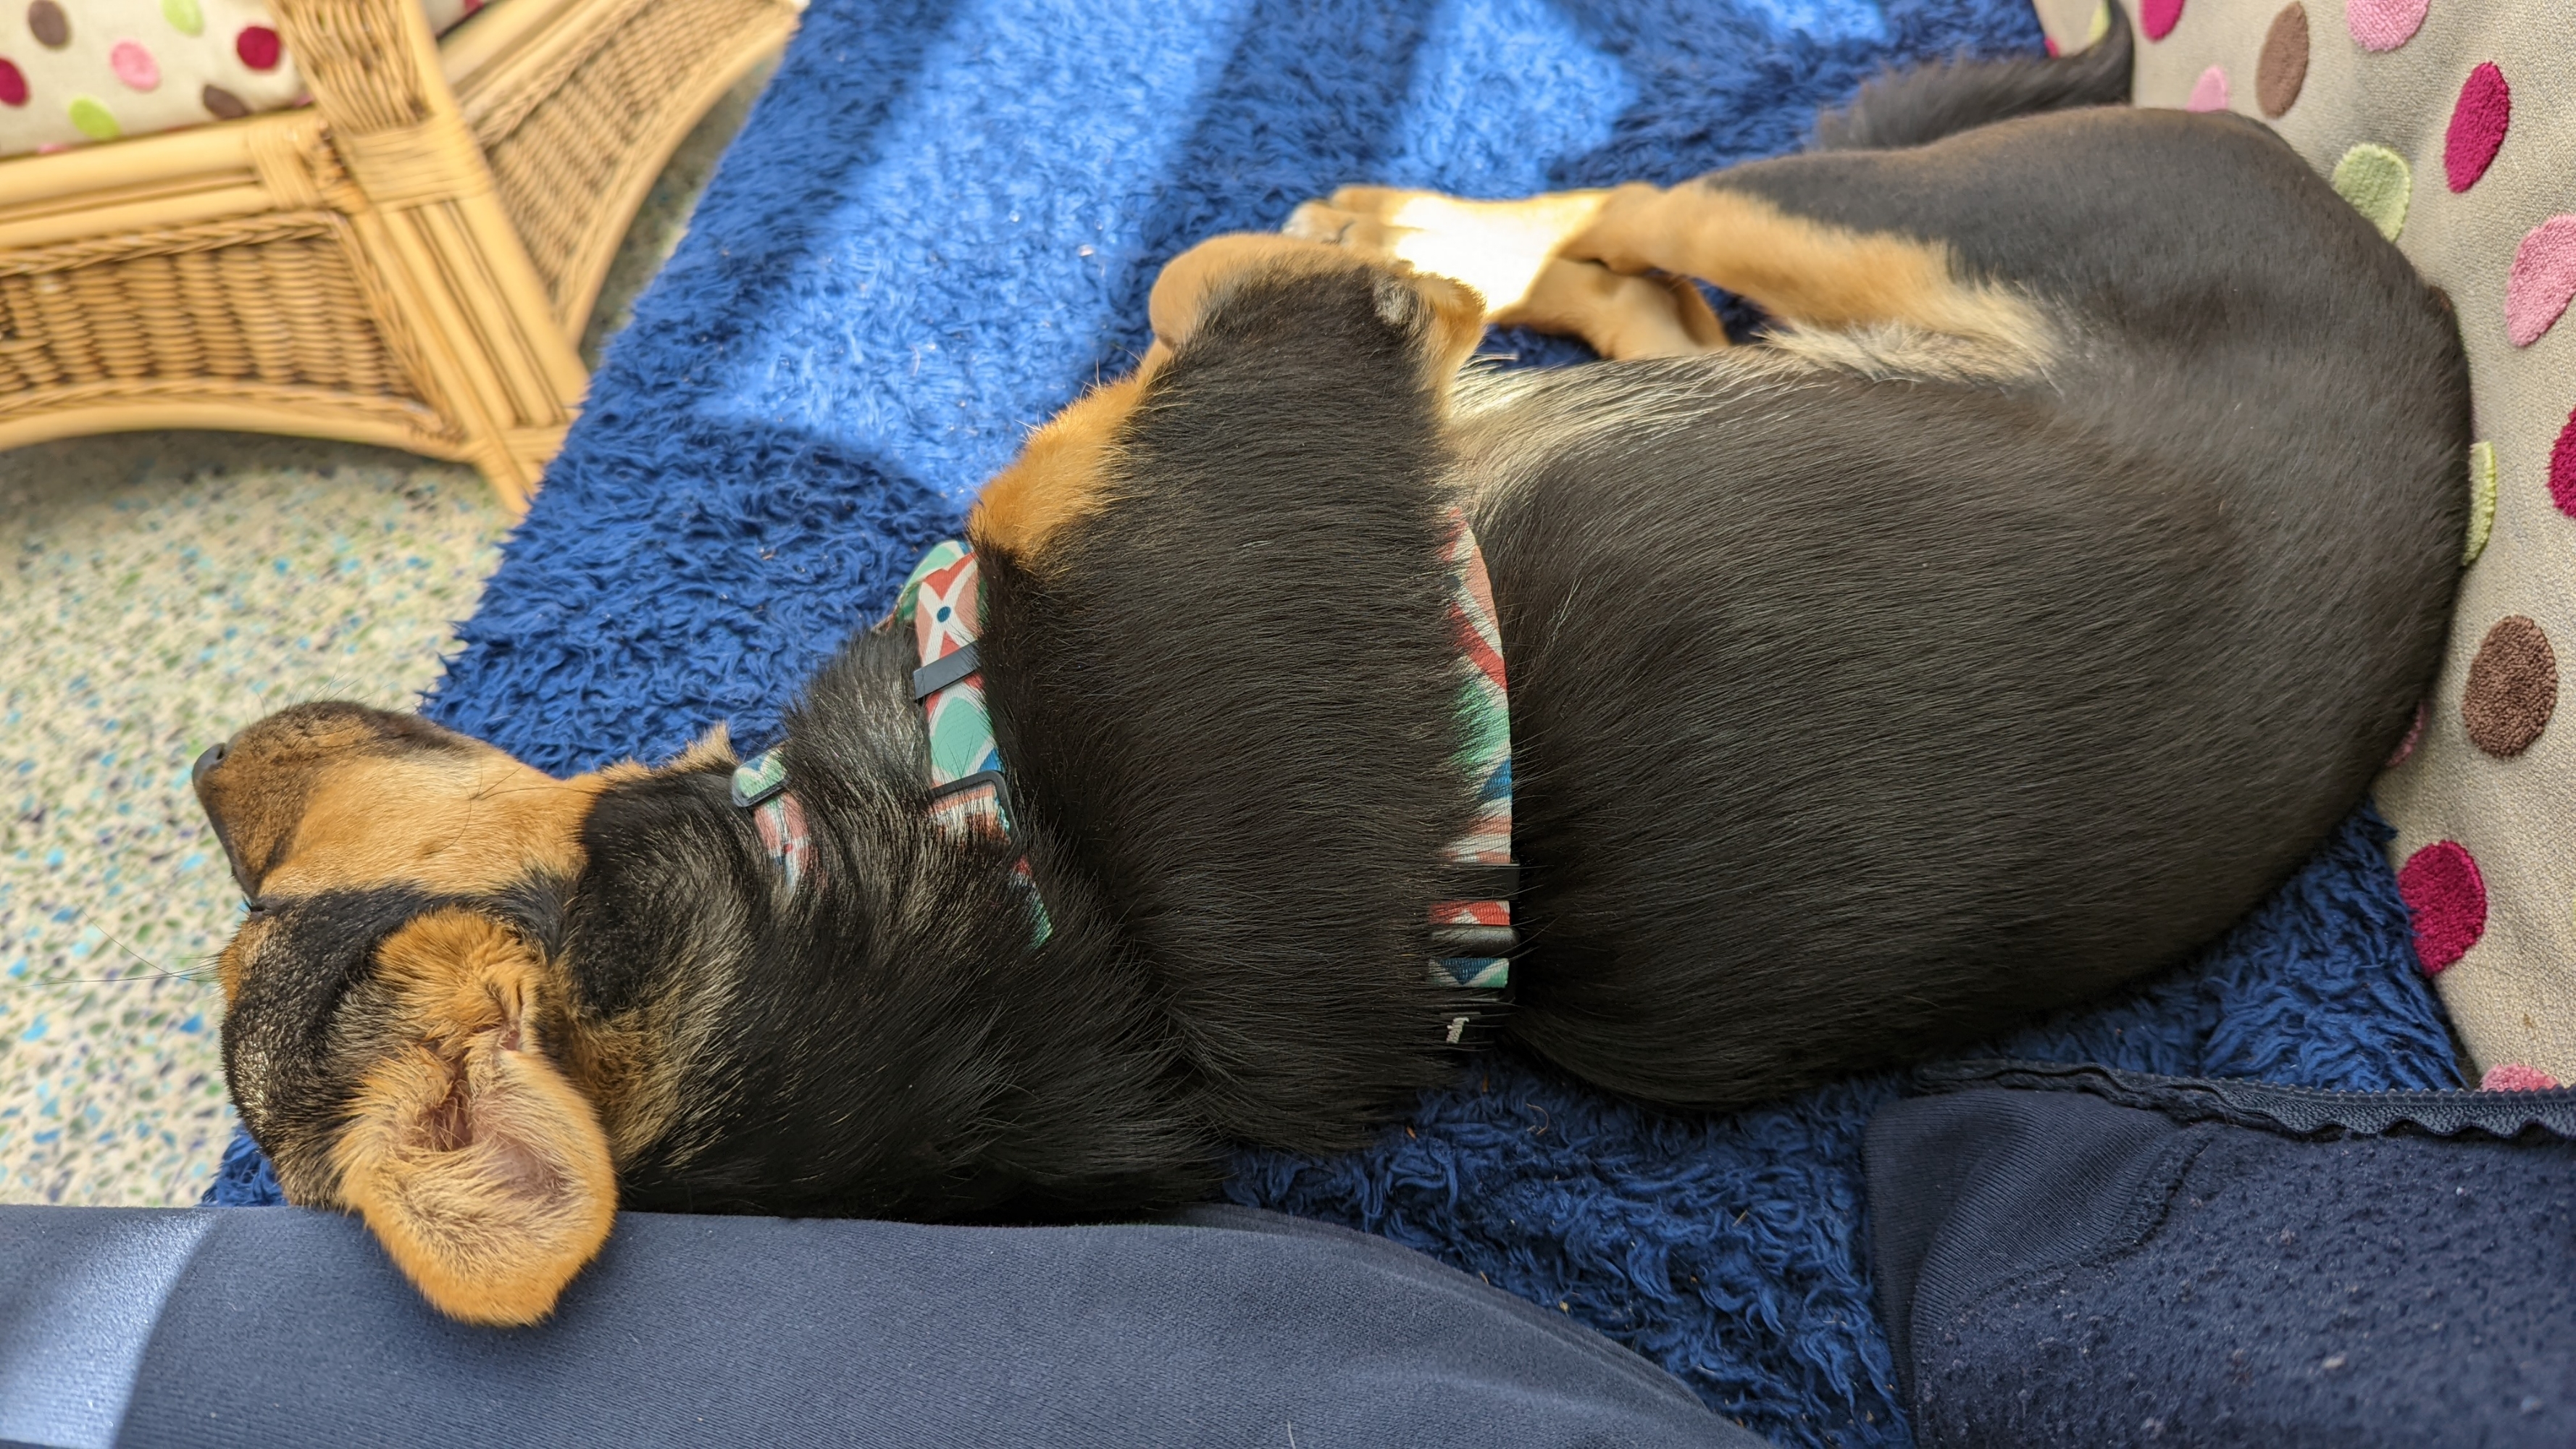 A view of the side of Jamie's leg, with Cookie the dog lying pushed up against him, on her side asleep, in a cute Zeedog harness